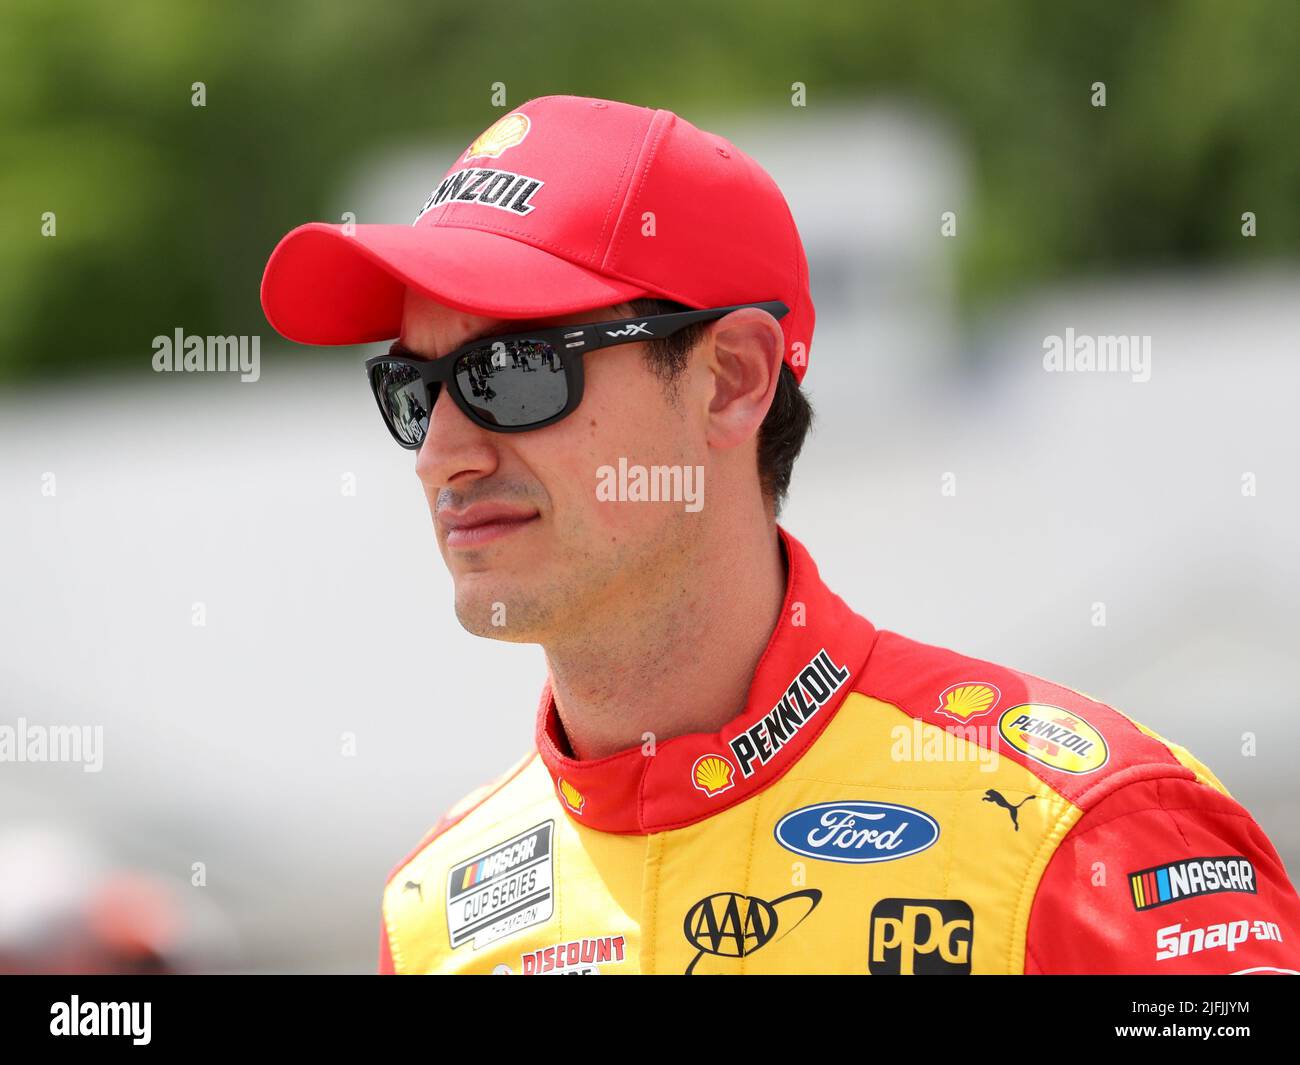 Plymouth, Wisconsin, USA. 3rd July, 2022. Joey Logano, driver of the #22 Shell Pennzoil Ford, looks before the NASCAR Cup Series Kwik Trip 250 at Road America on July 03, 2022 in Plymouth, Wisconsin. Ricky Bassman/Cal Sport Media/Alamy Live News Stock Photo